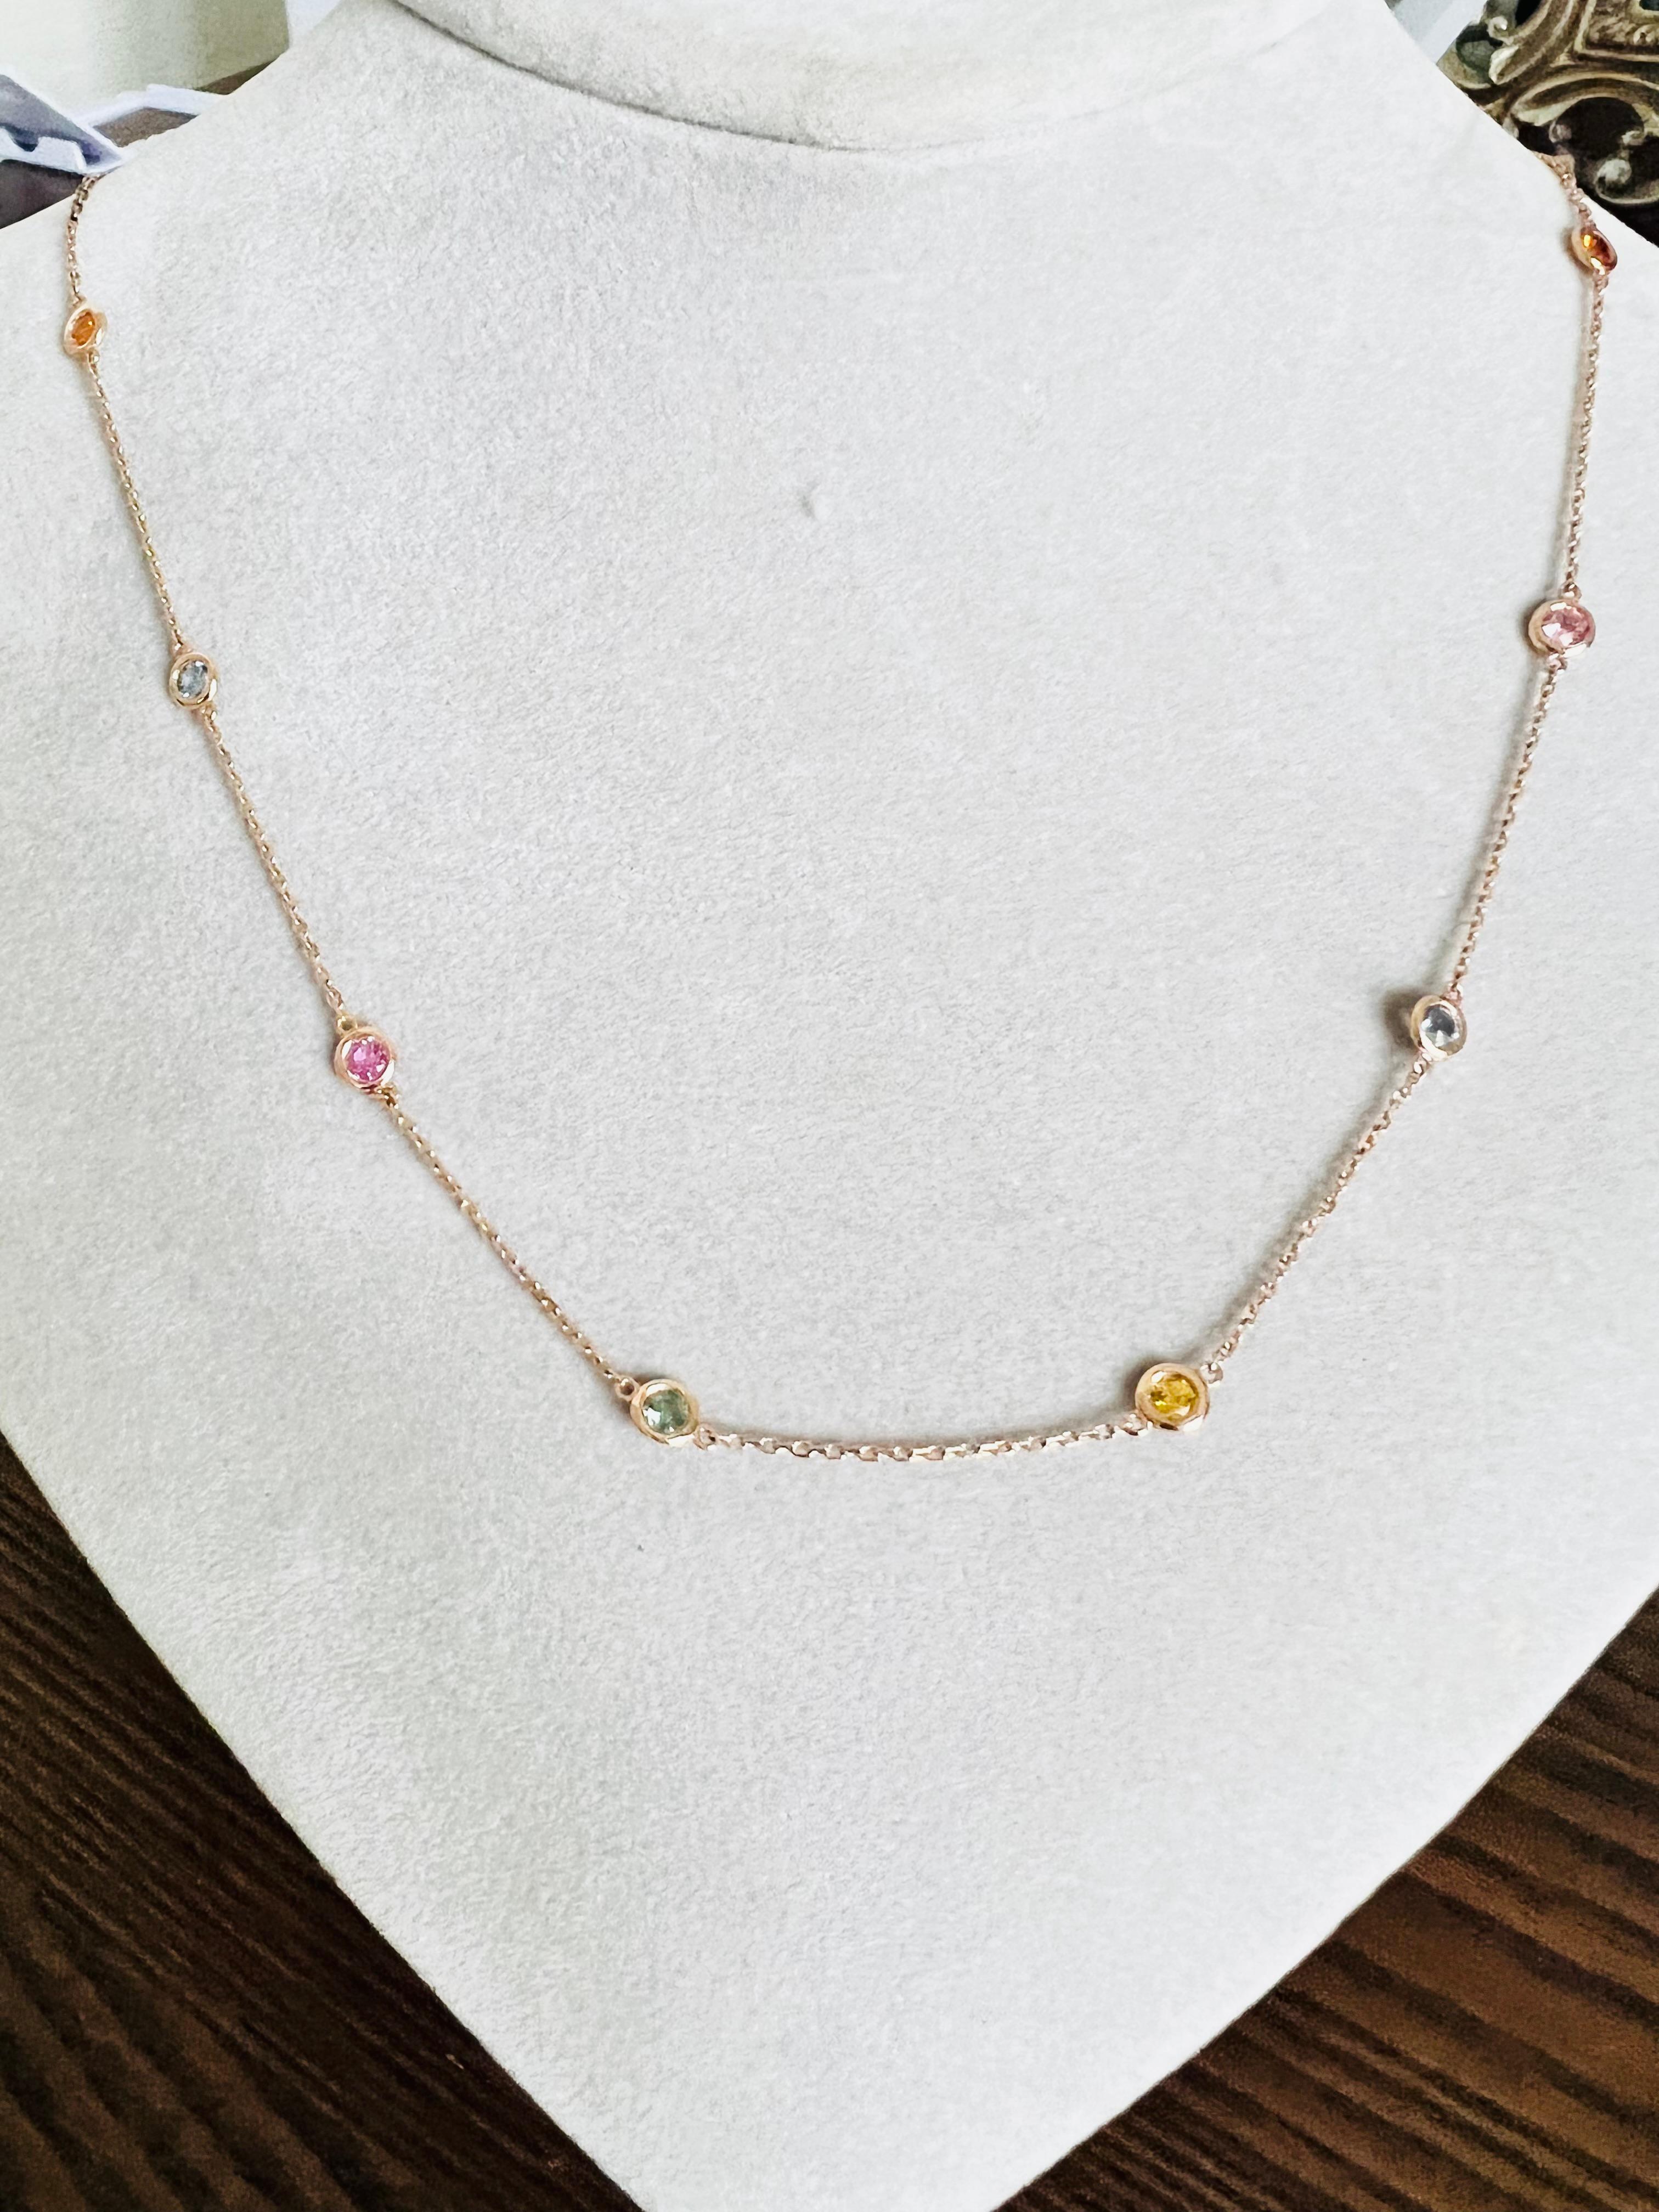 Women's 2.21 Carat Natural Multi Color Sapphire Rose Gold Chain Necklace  For Sale